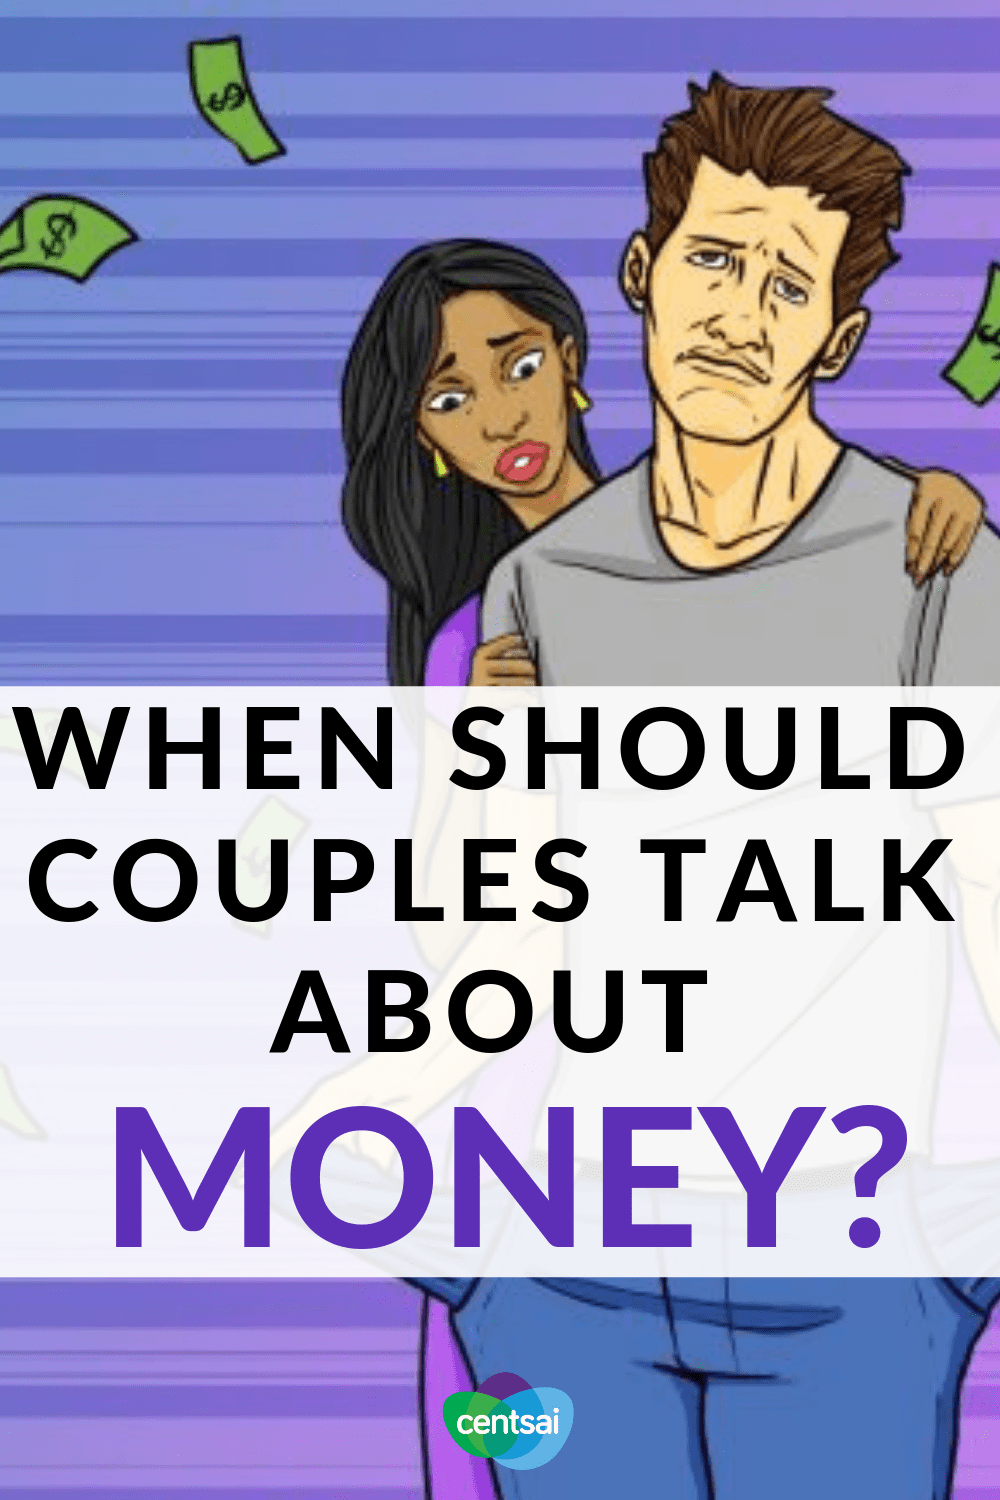 When Should Couples Talk About Money? Many people would rather talk about their sex lives than discuss their income, debt, or savings rate, but the money talk is important. #Dating #income #Marriage relationship #finances #personalfinance #money #frugaltips